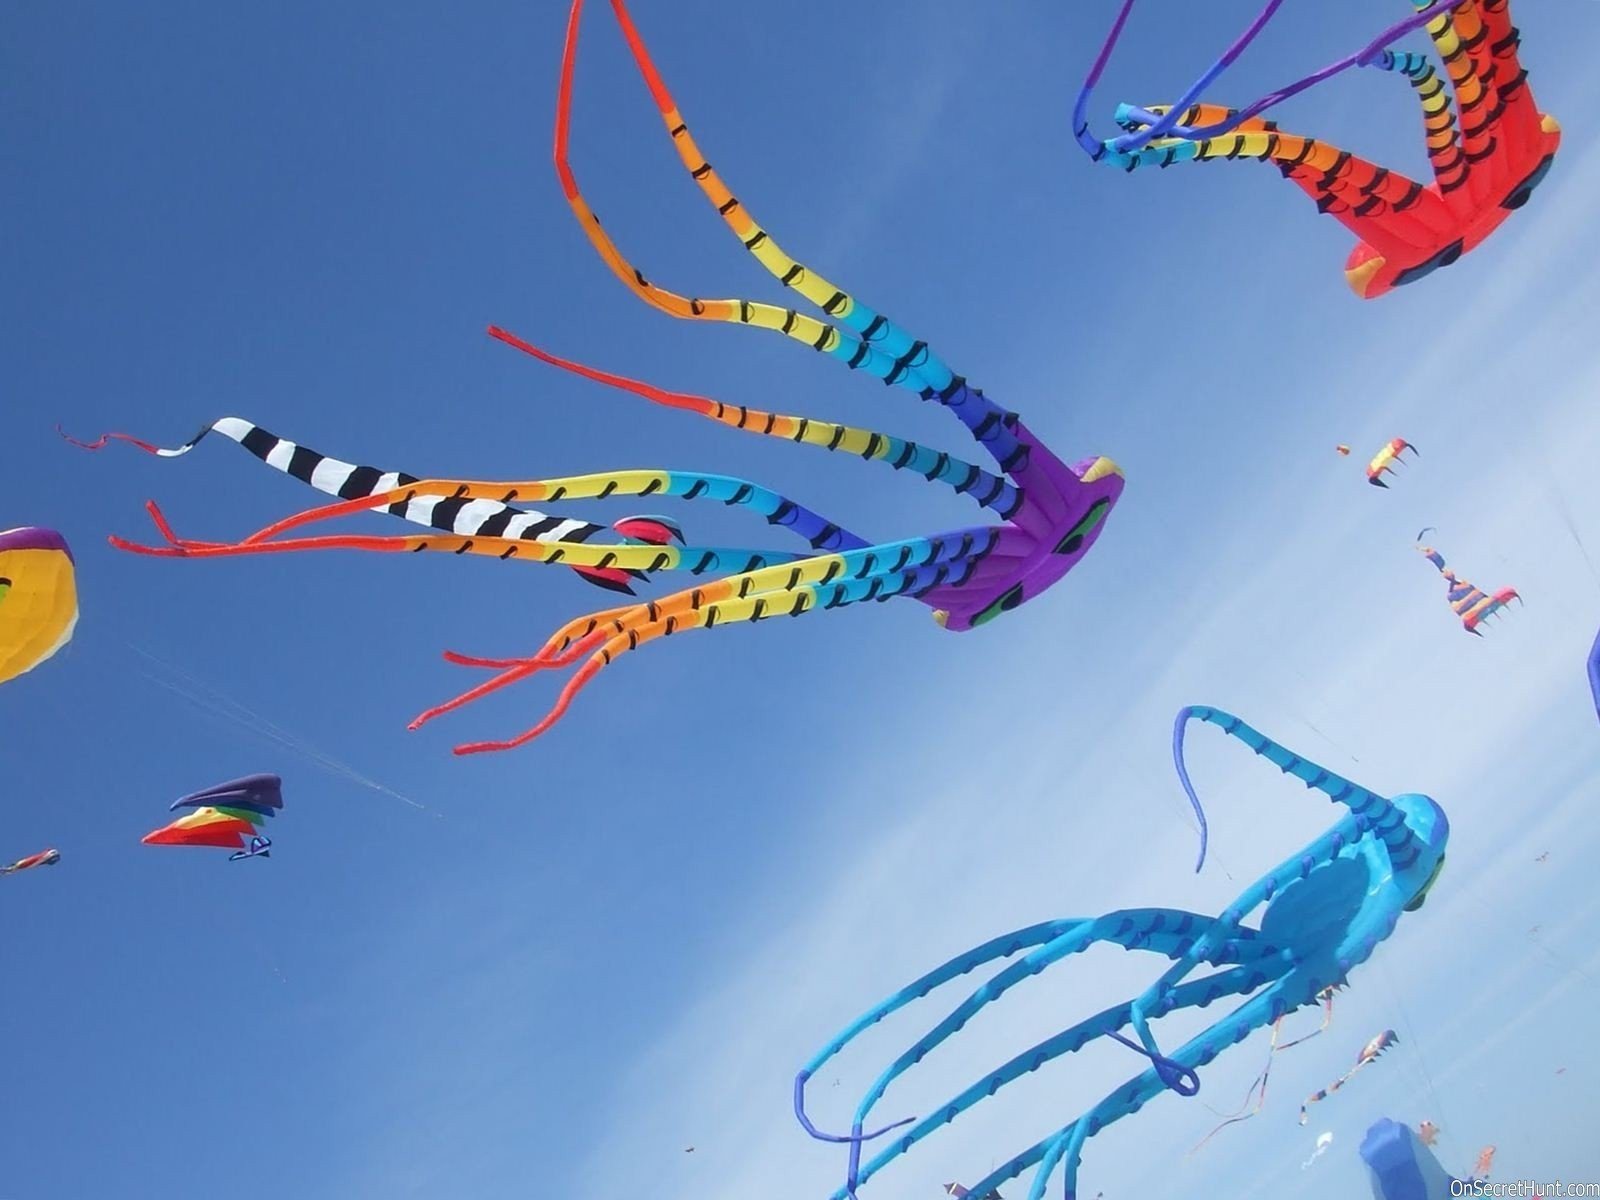 colorful, Big, And, Different, Style, Kites, Fly, In, Sky, On, Uttarayan, Festival Wallpaper